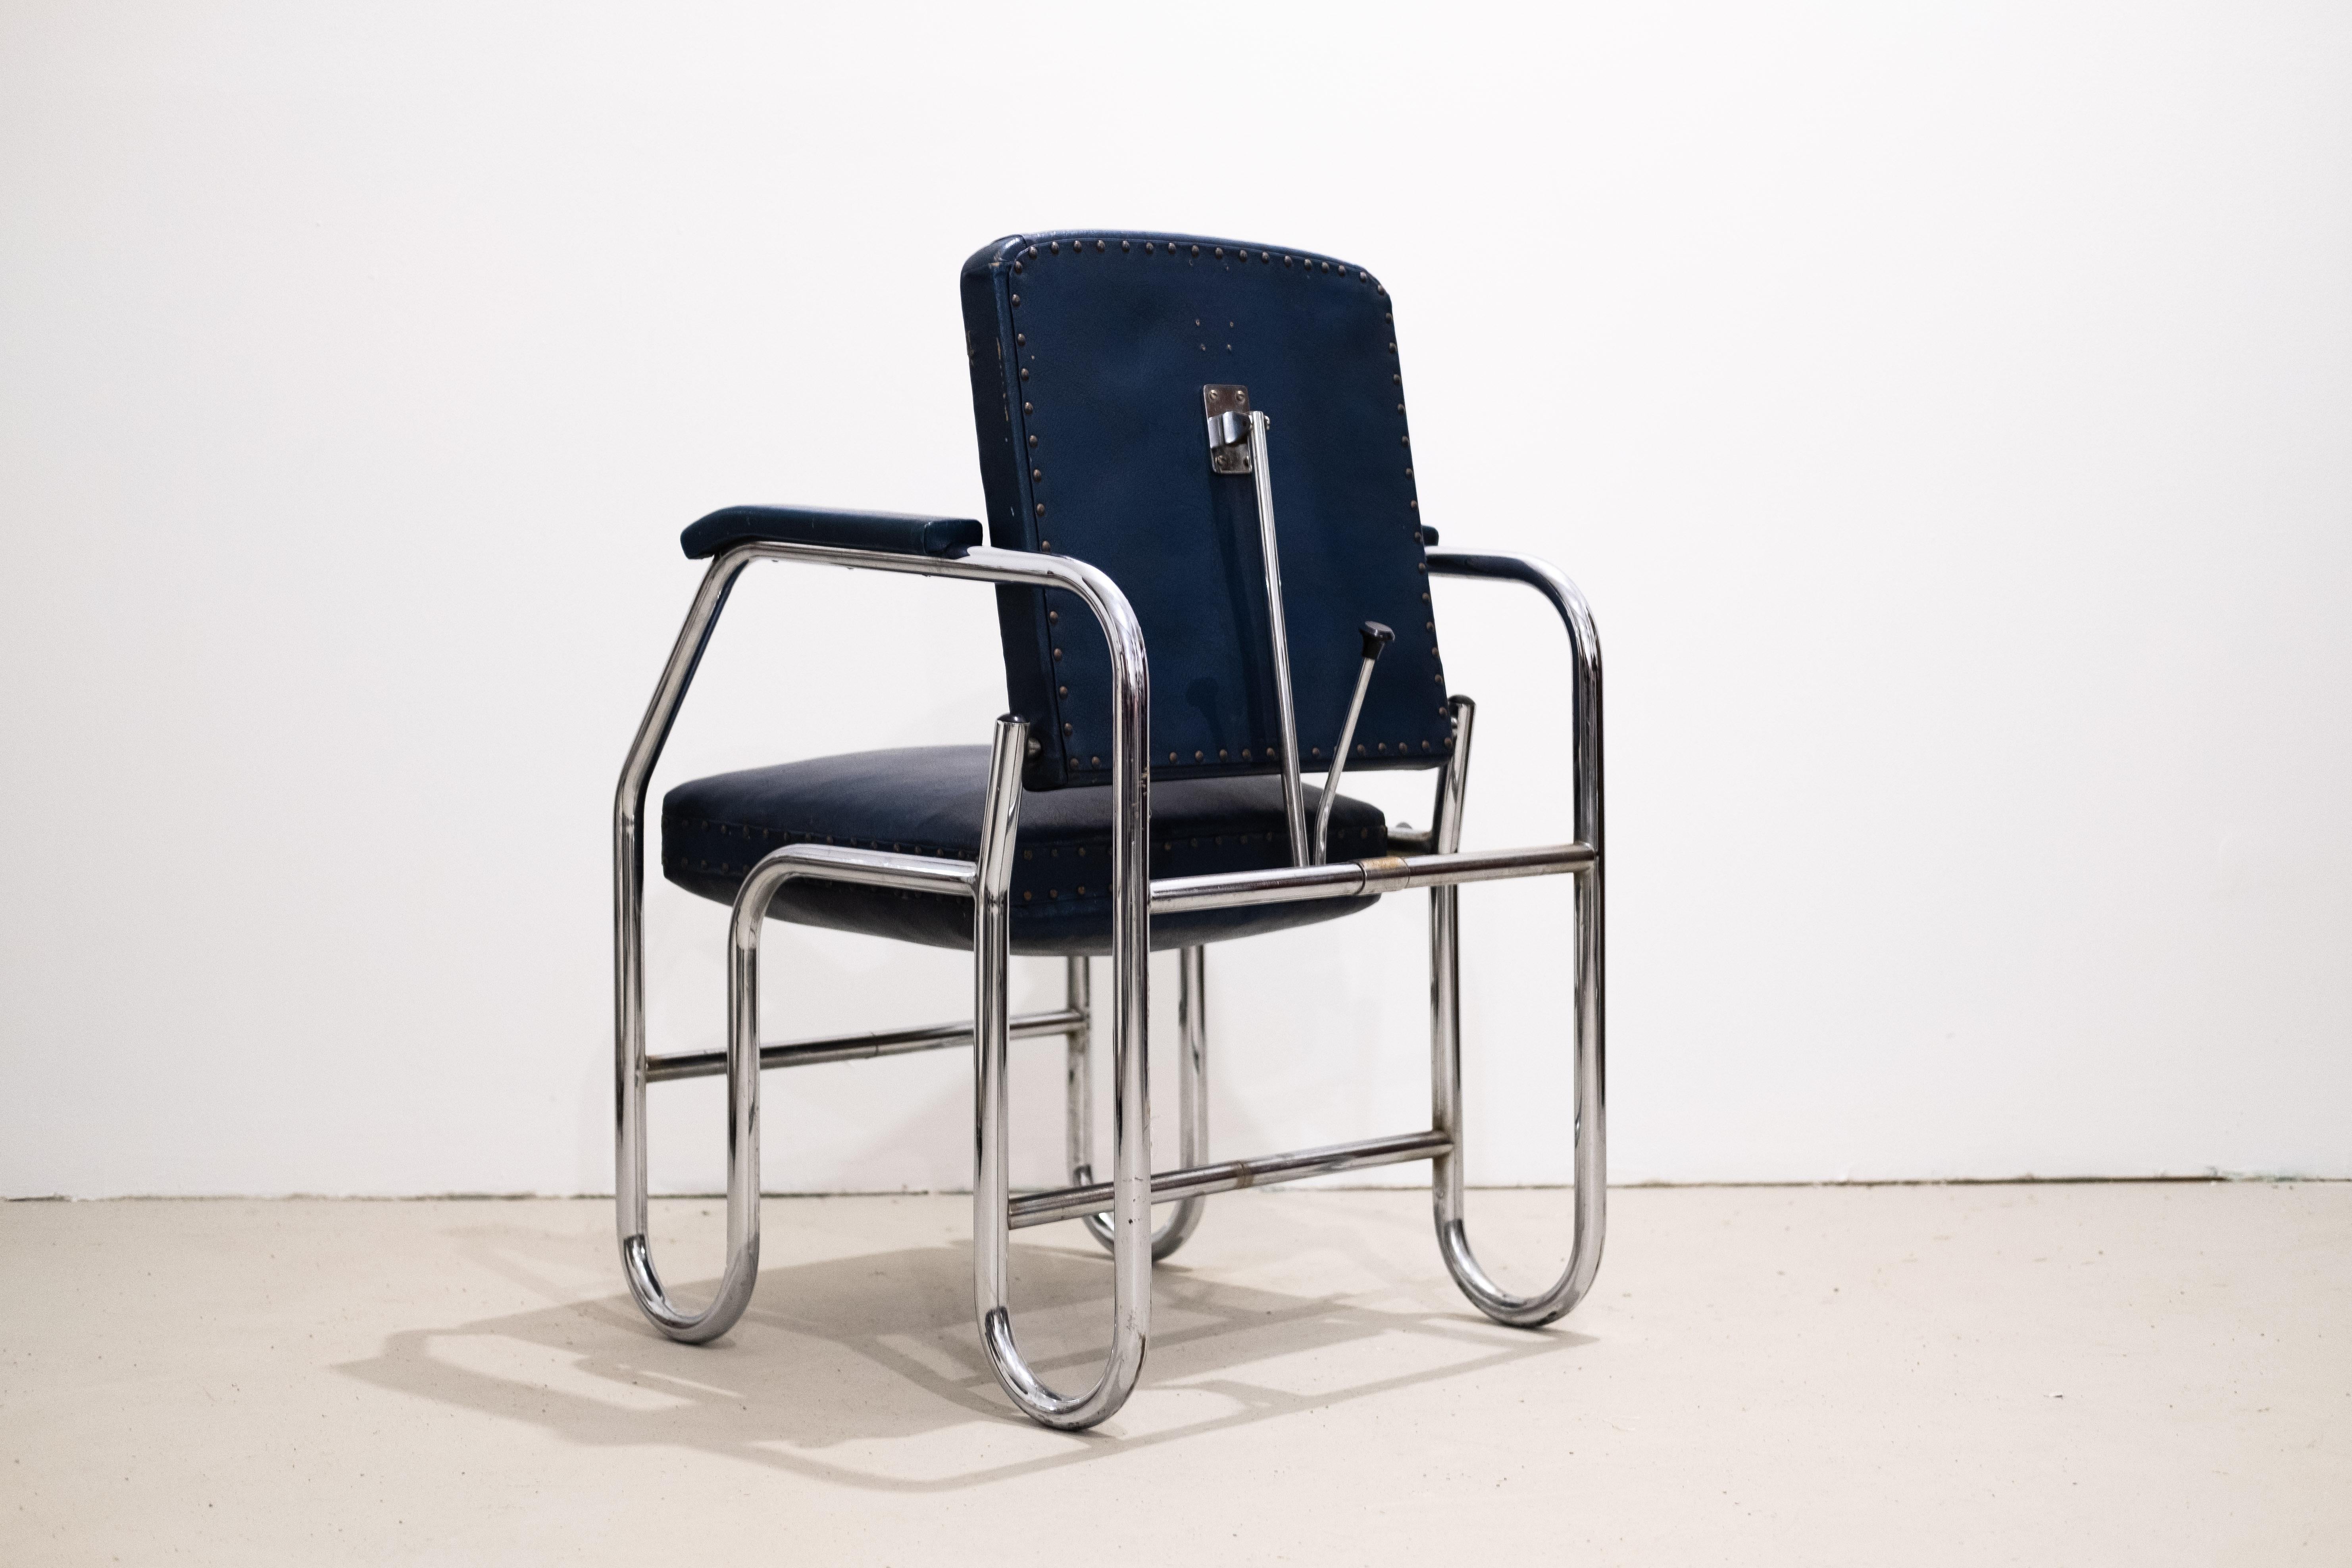 Blue Bauhaus Steelpipe Armchair with rotatable Seat (Amsterdam, 1930) For Sale 6